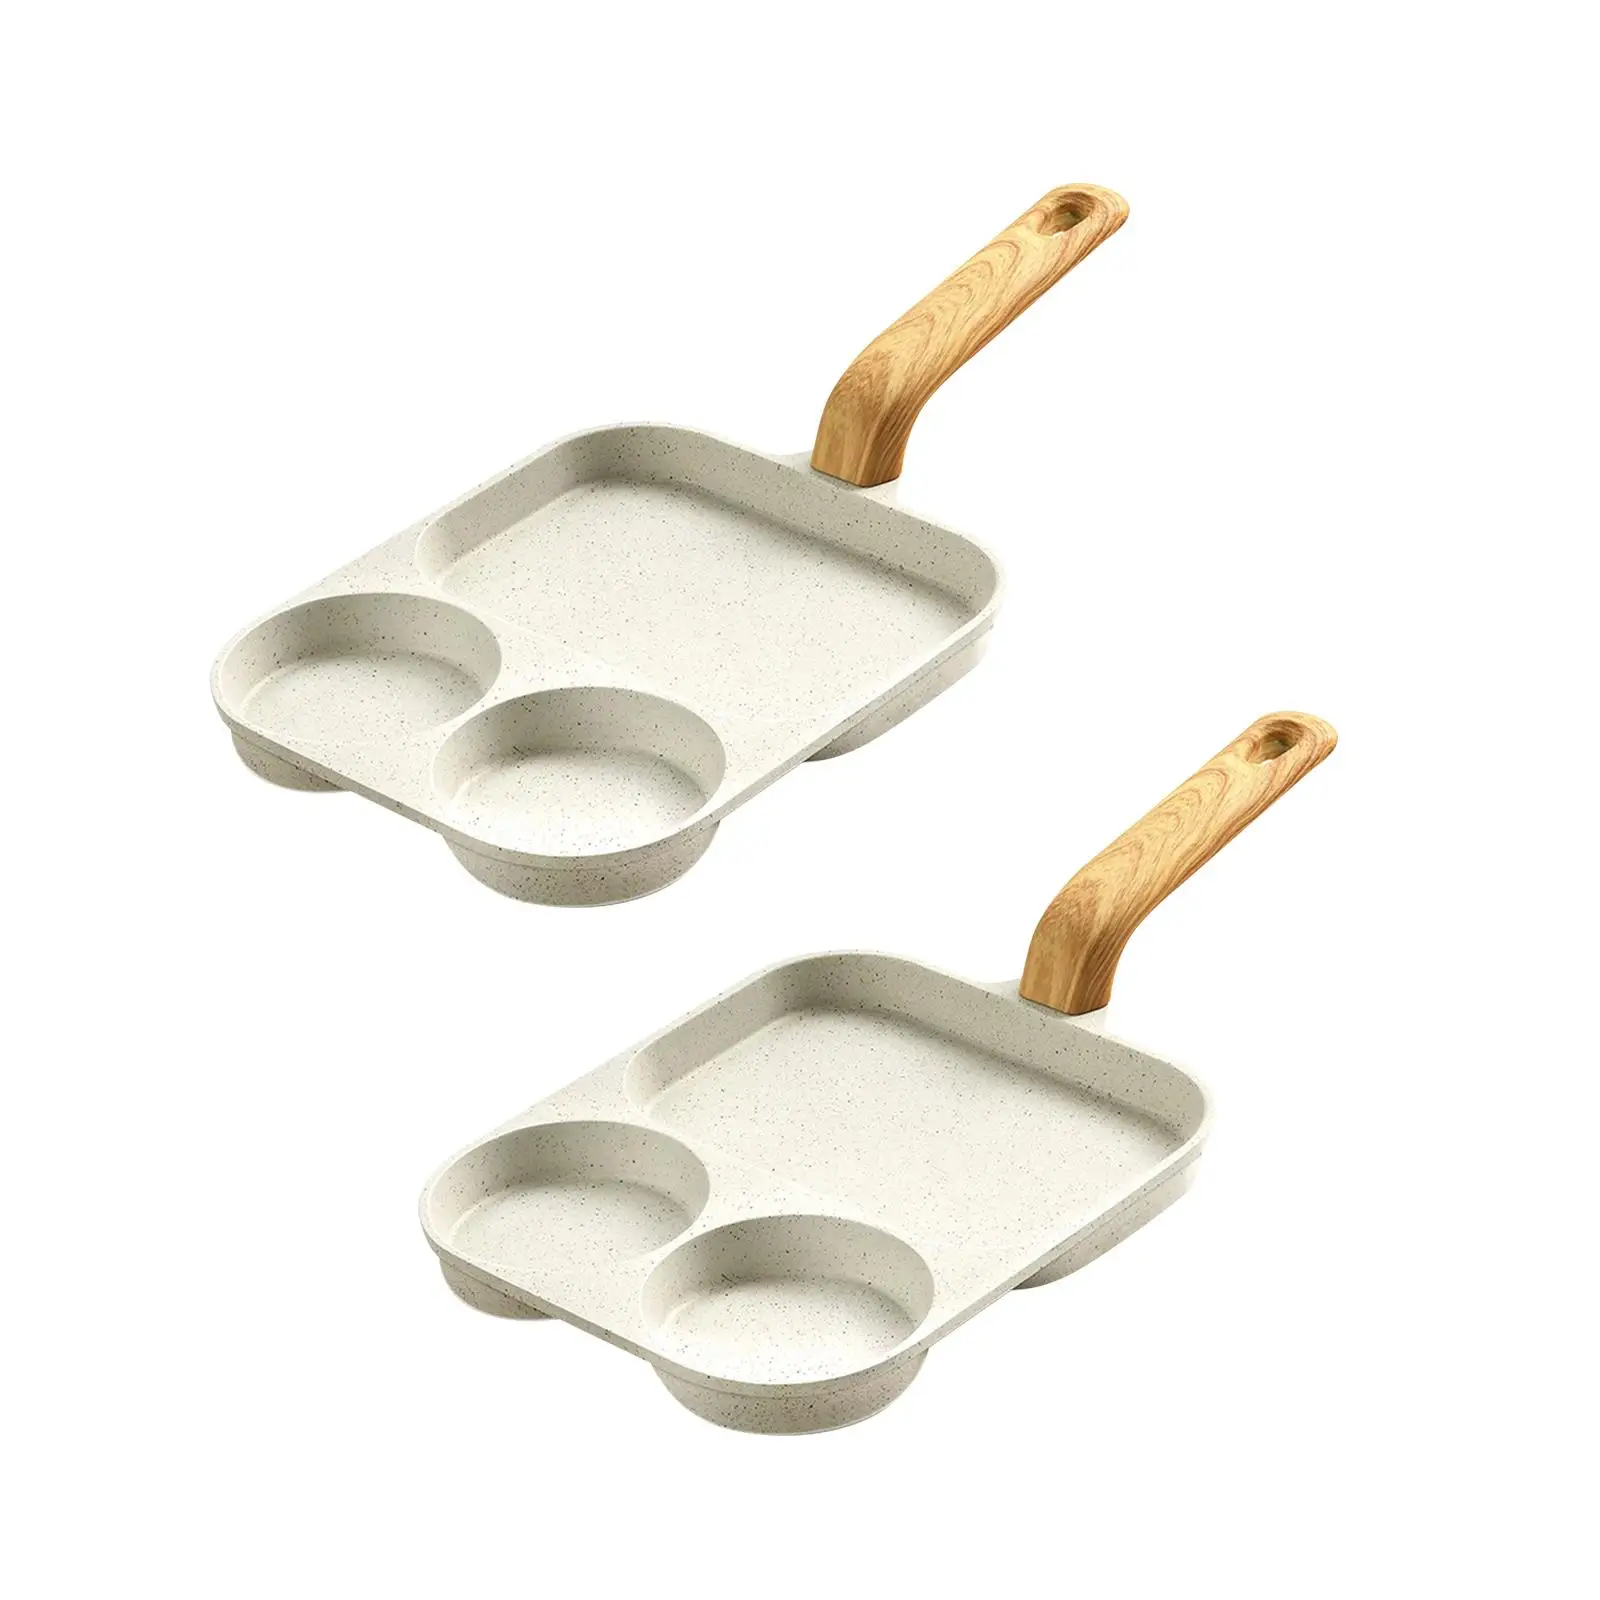 Omelette Pan Grill Pan Kitchen Accessories for Cooking Frying Vegetable